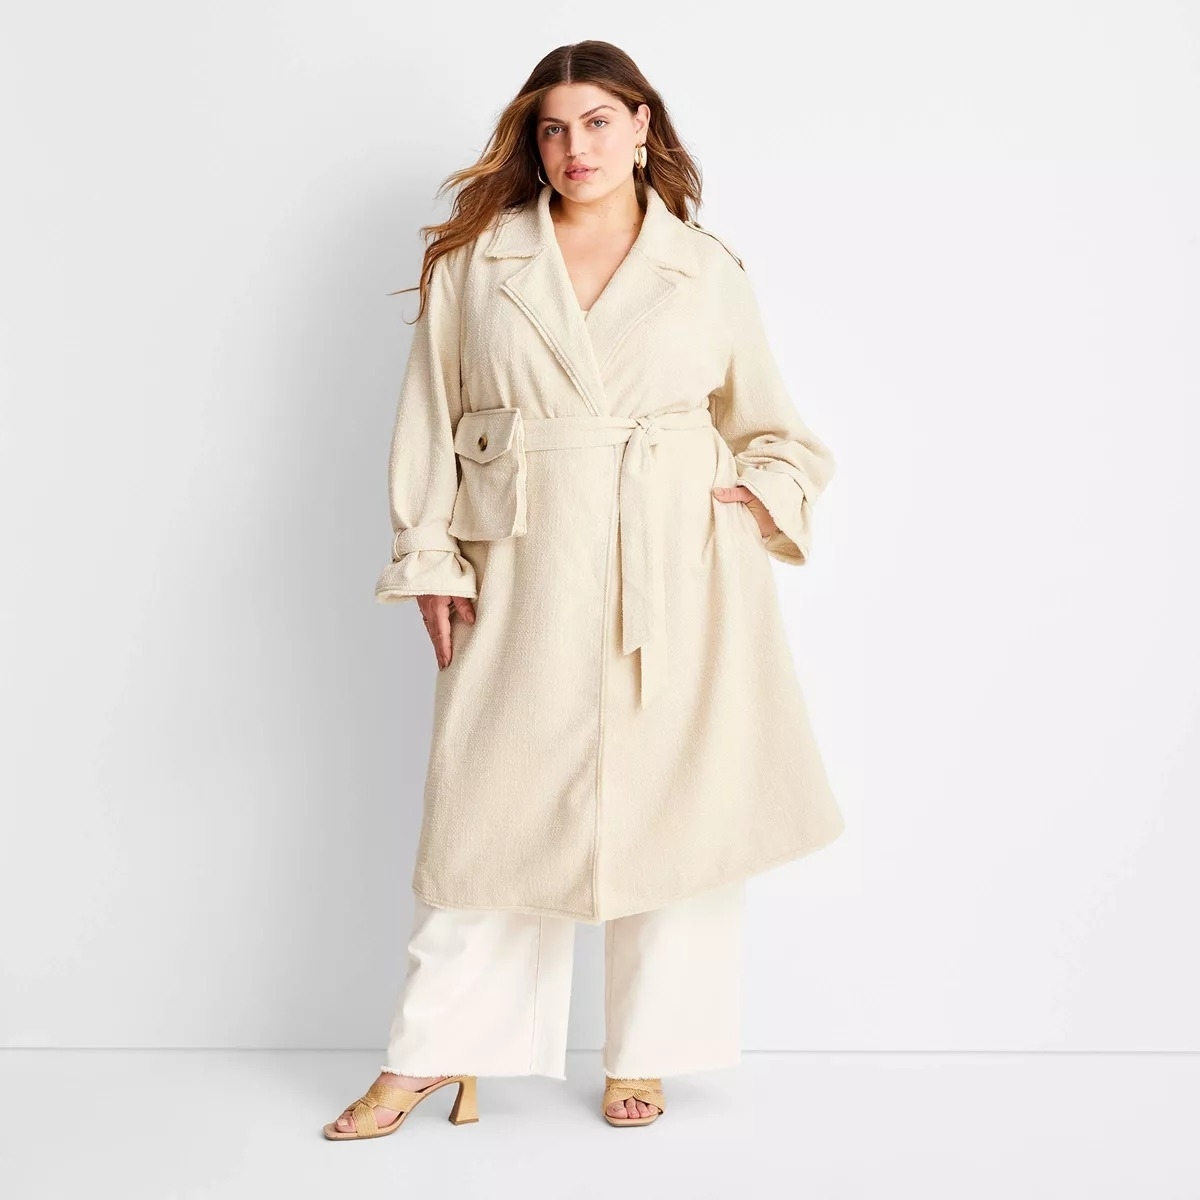 A model poses in a beige trench coat